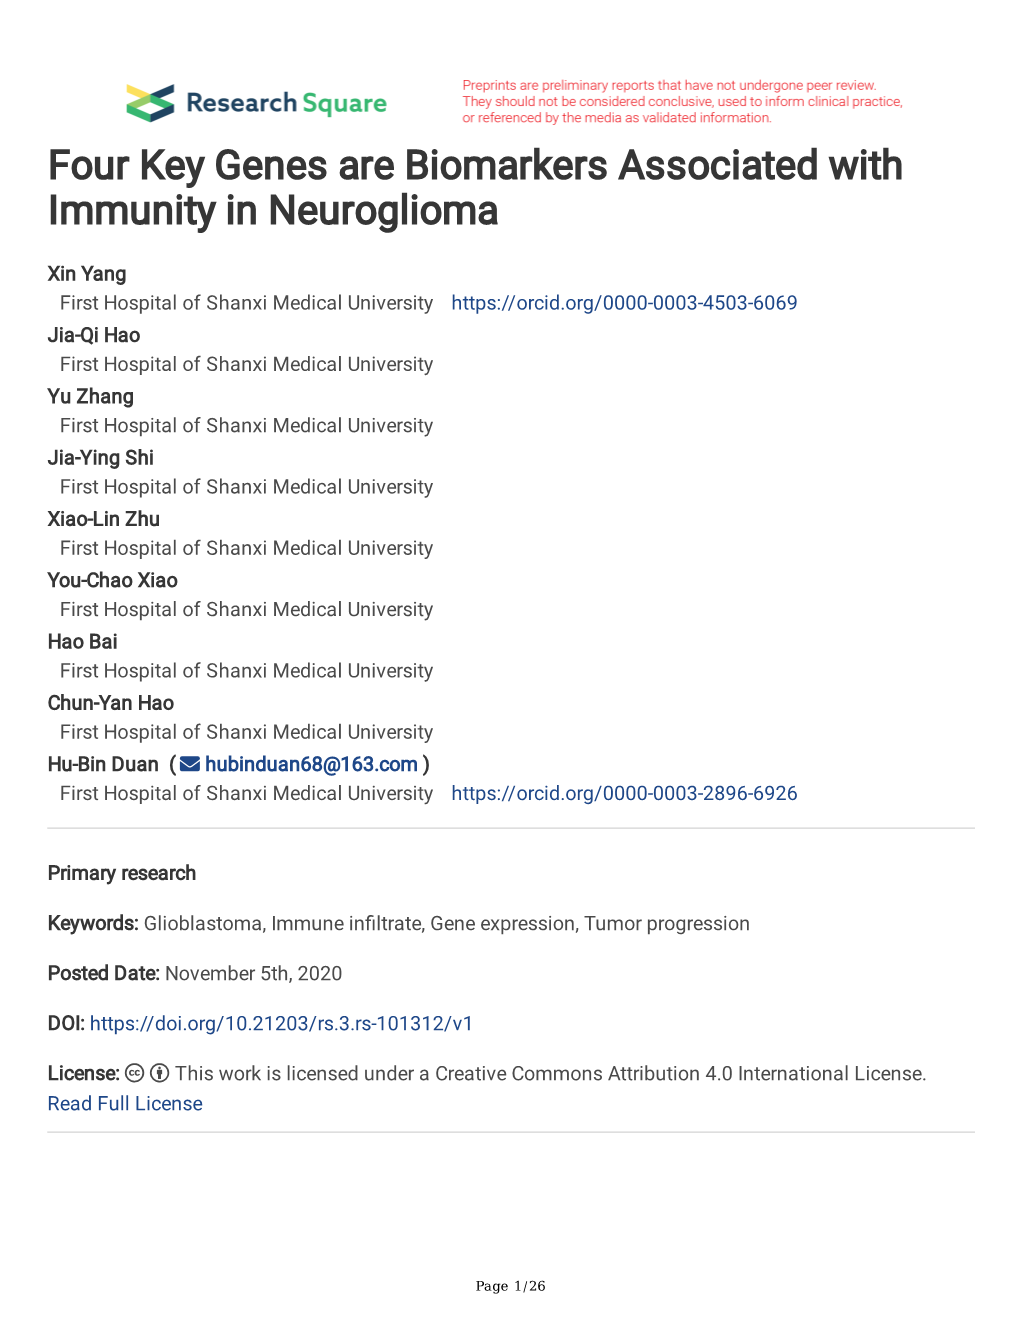 Four Key Genes Are Biomarkers Associated with Immunity in Neuroglioma